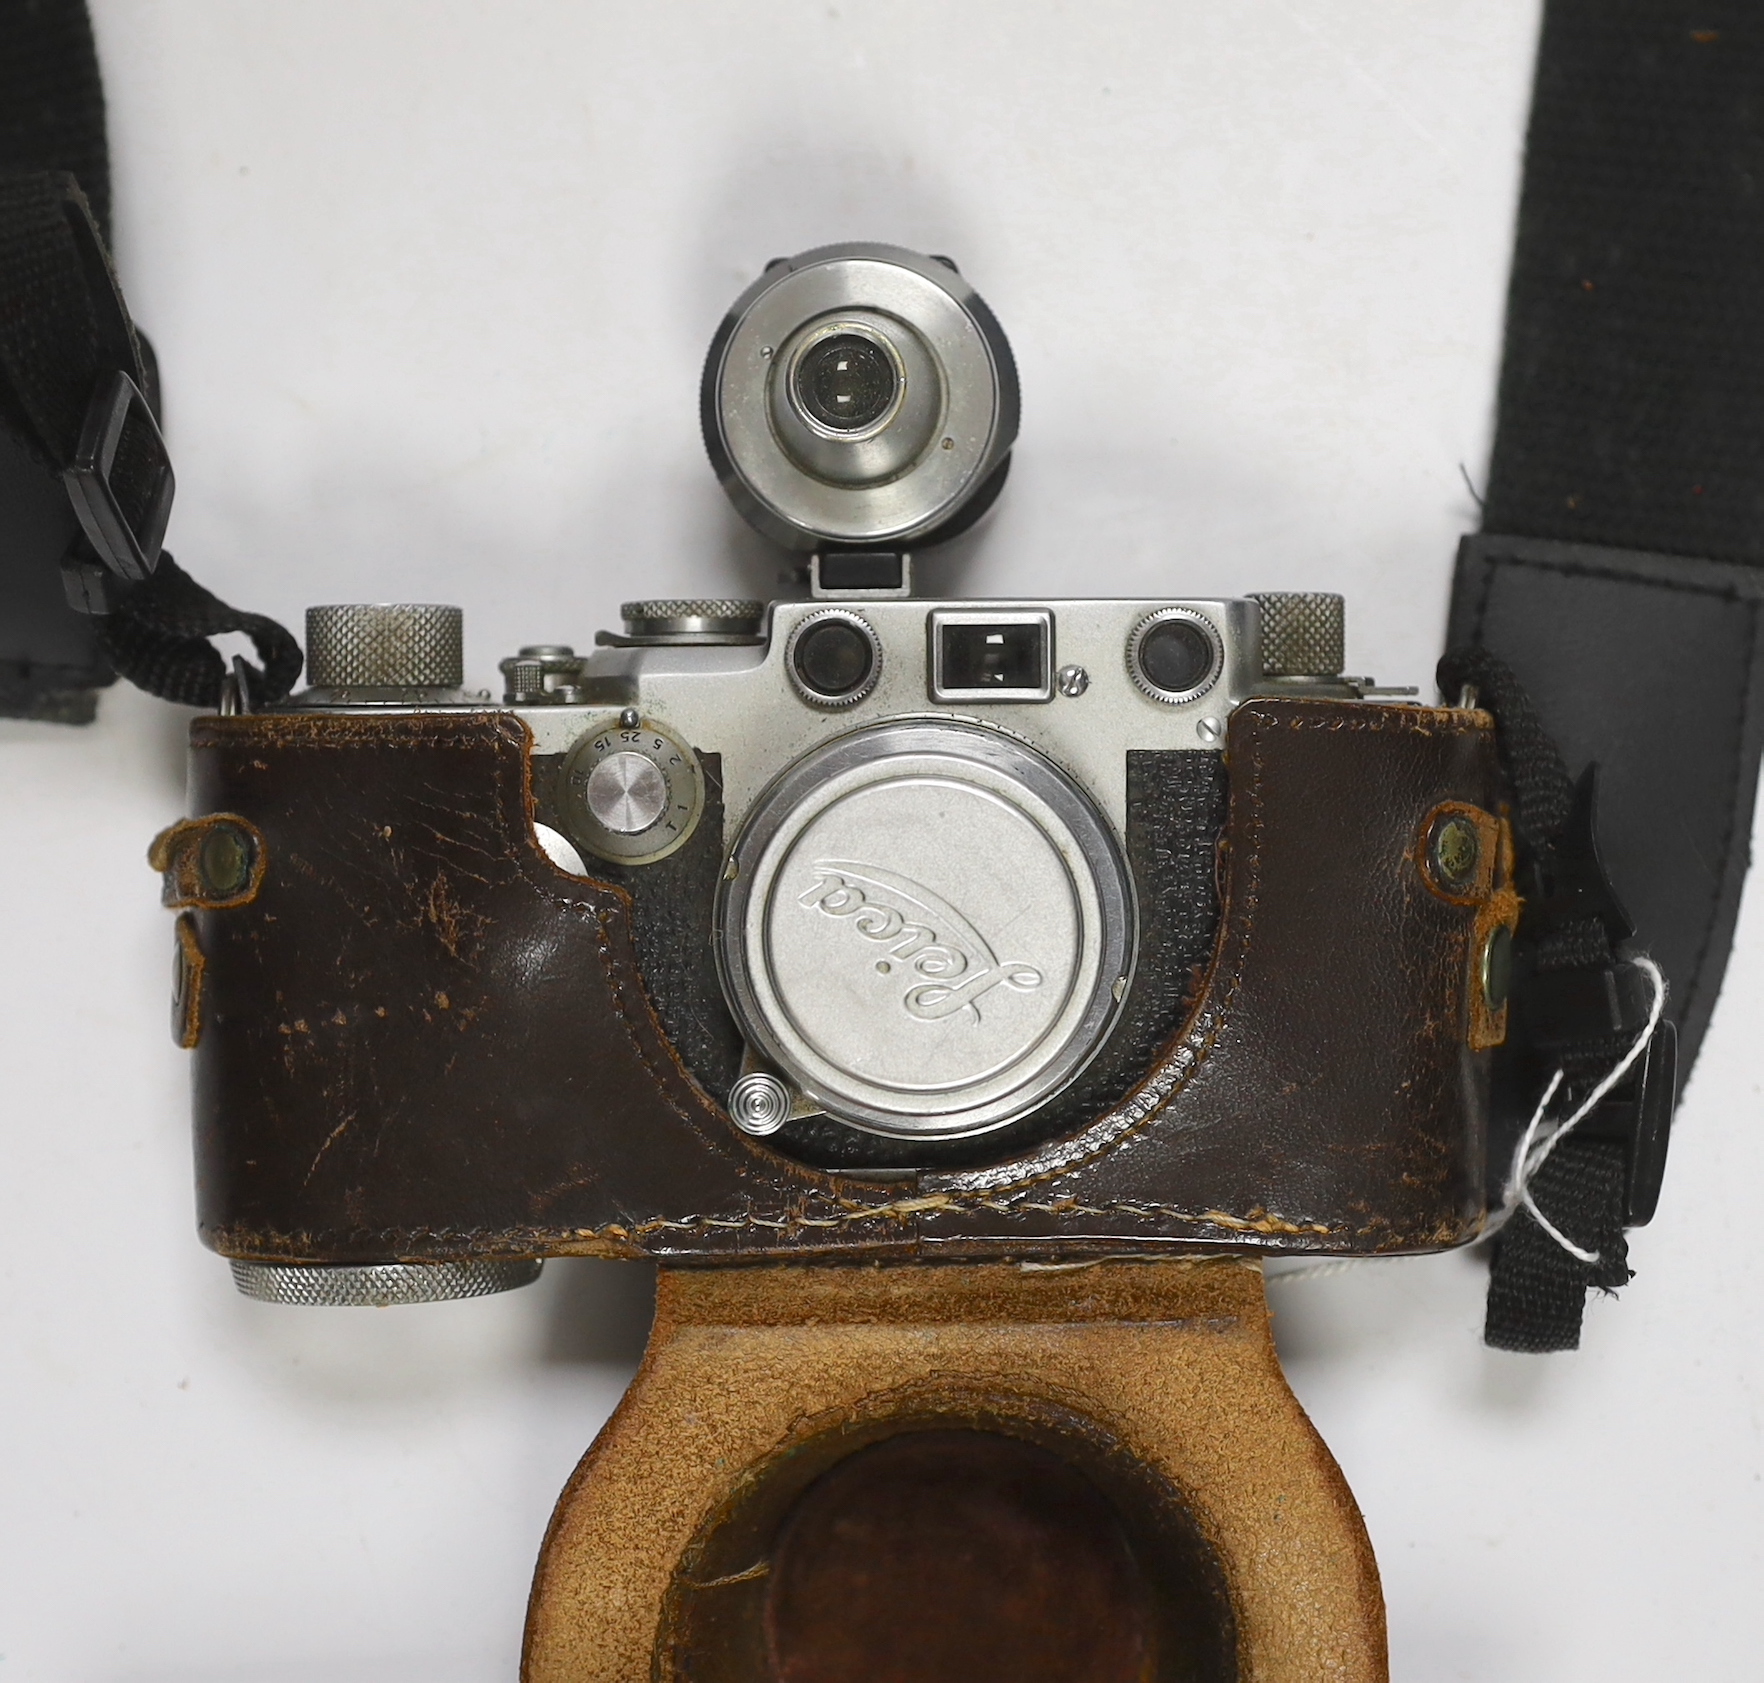 A Leica IIf camera, serial no. 577837, c. 1952-3, with Leitz Vidom viewfinder, Summar f+5cm 1.2 lens, in leather case with replacement strap